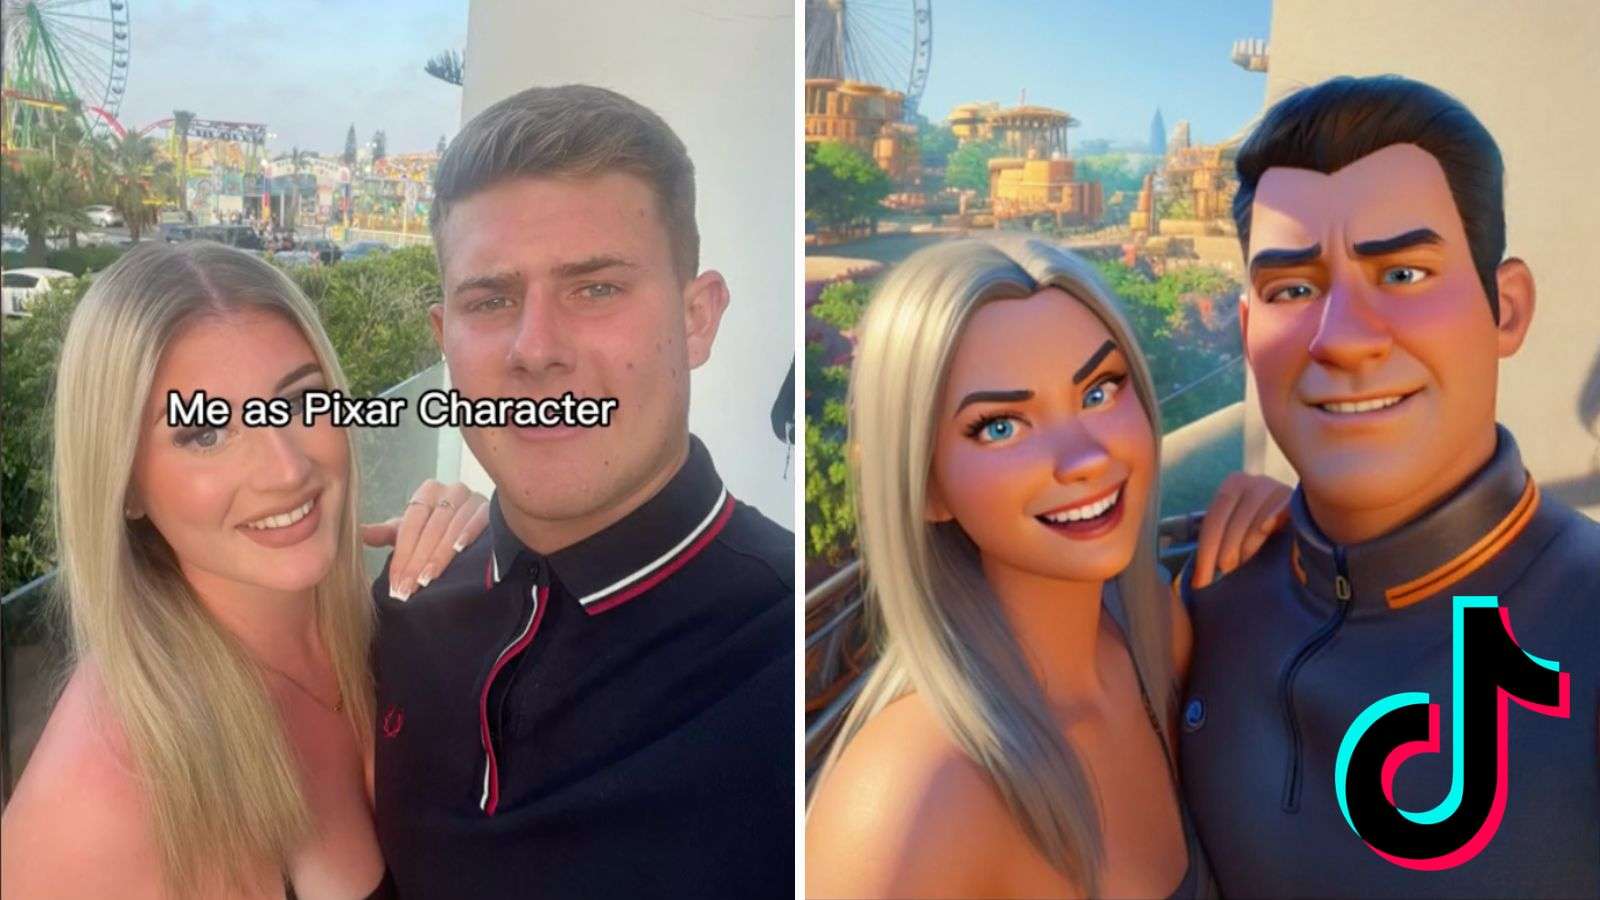 Couple trying the AI Pixar Character filter on TikTok